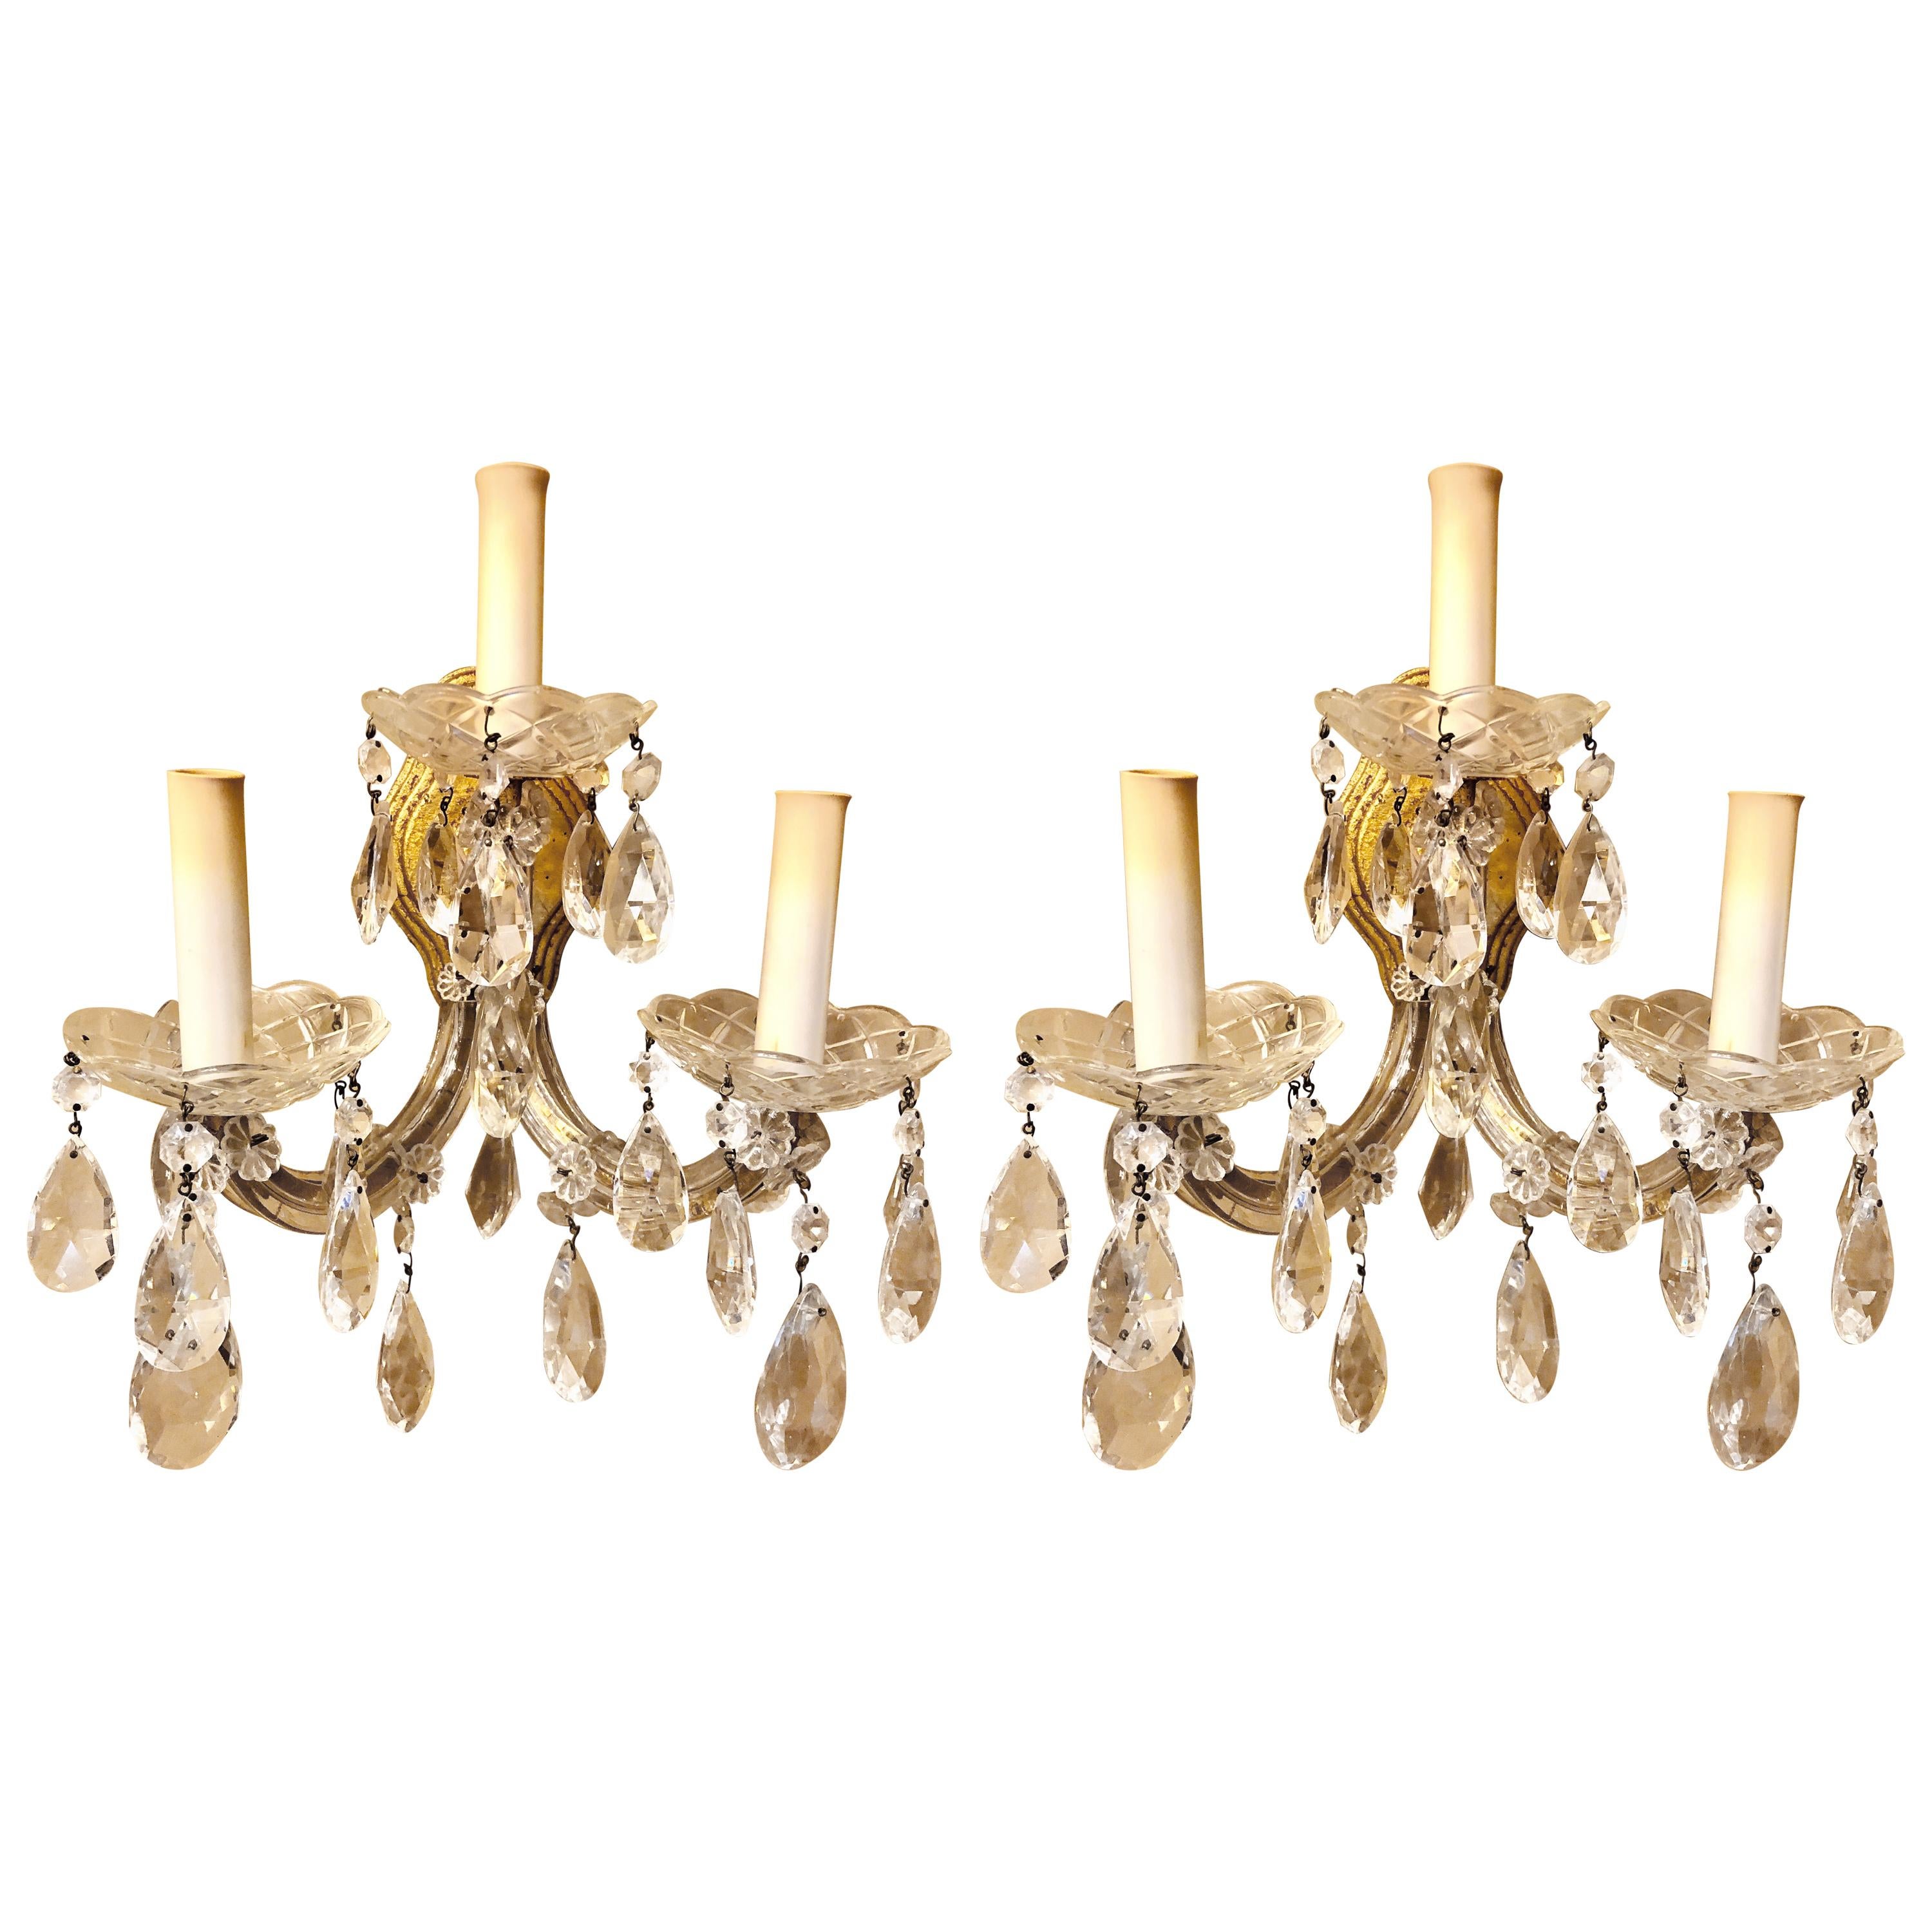 Pair of Three Light Crystal Candelabra Wall Sconces on Giltwood